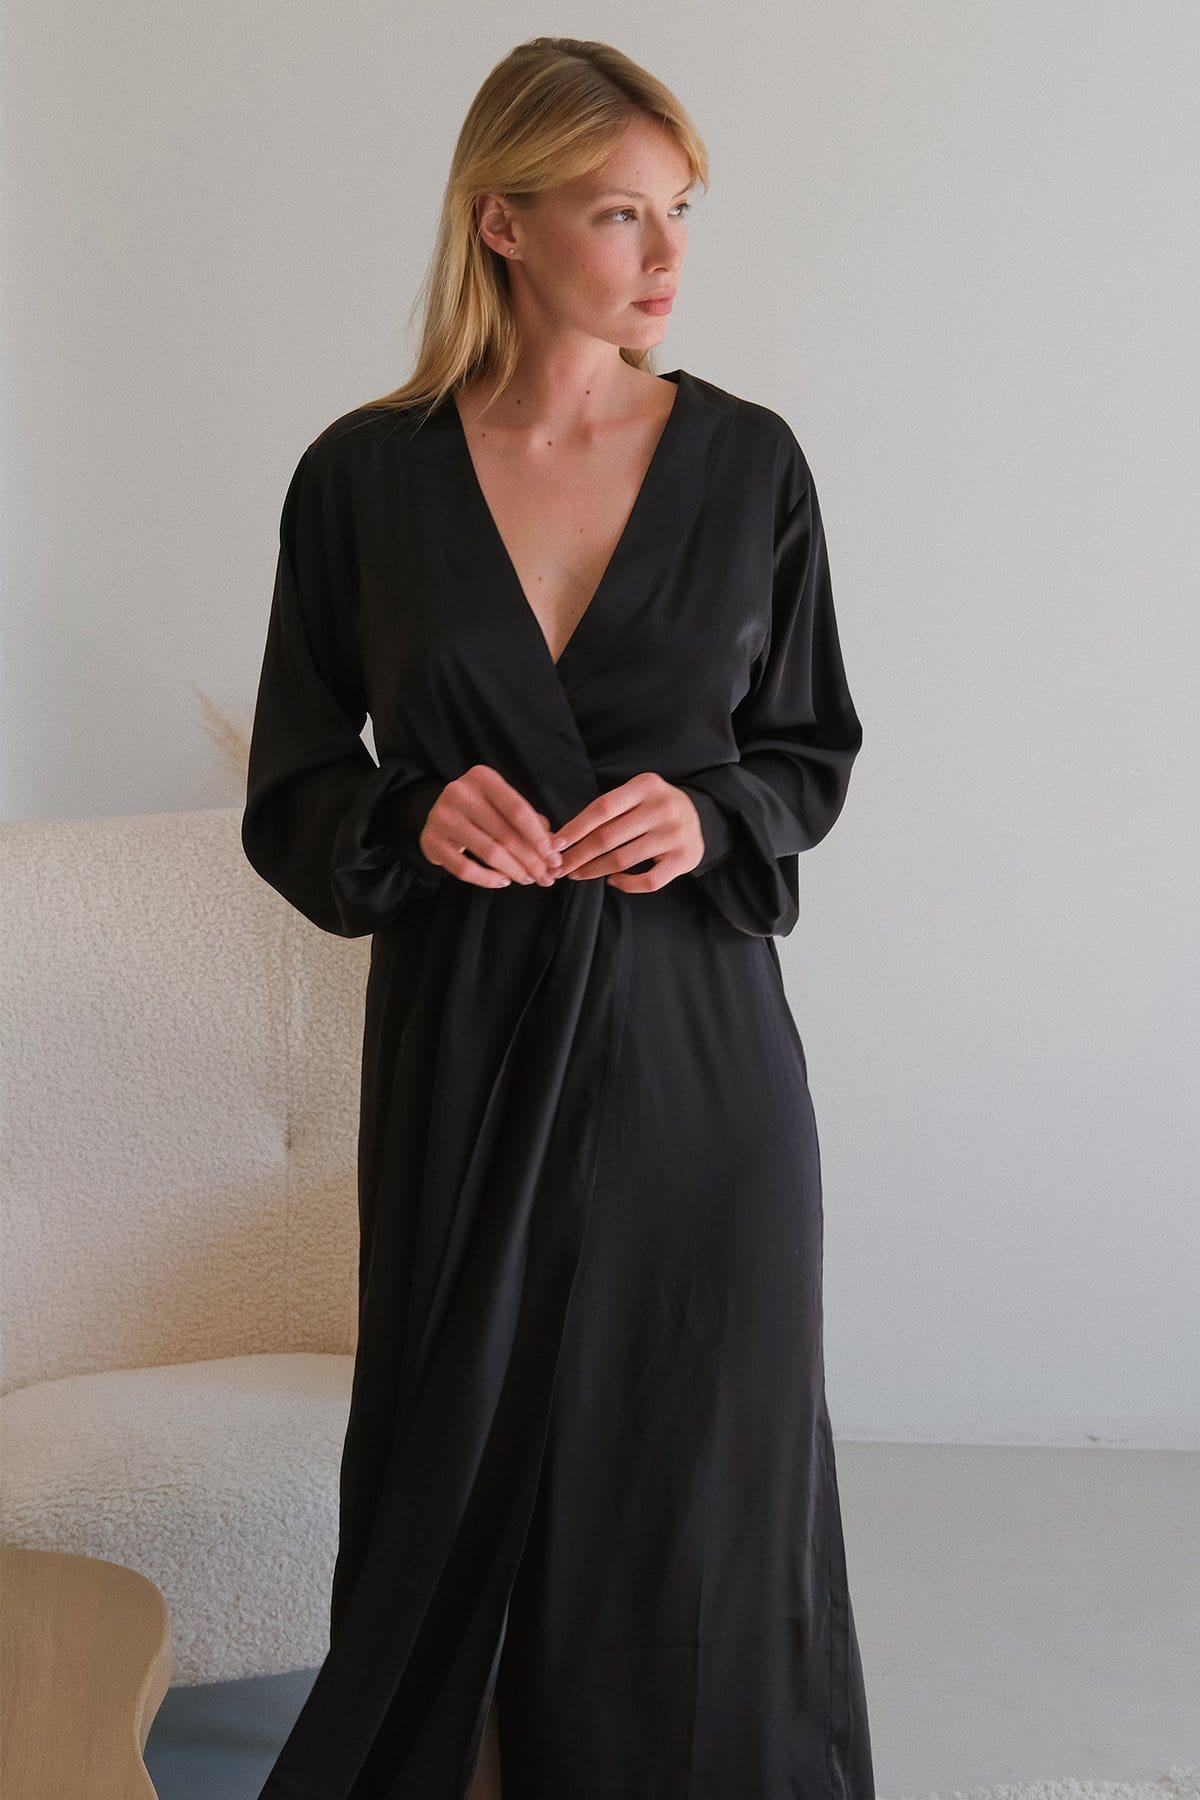 Shop Premium Silk Long Robe in black color with Cuffs Online